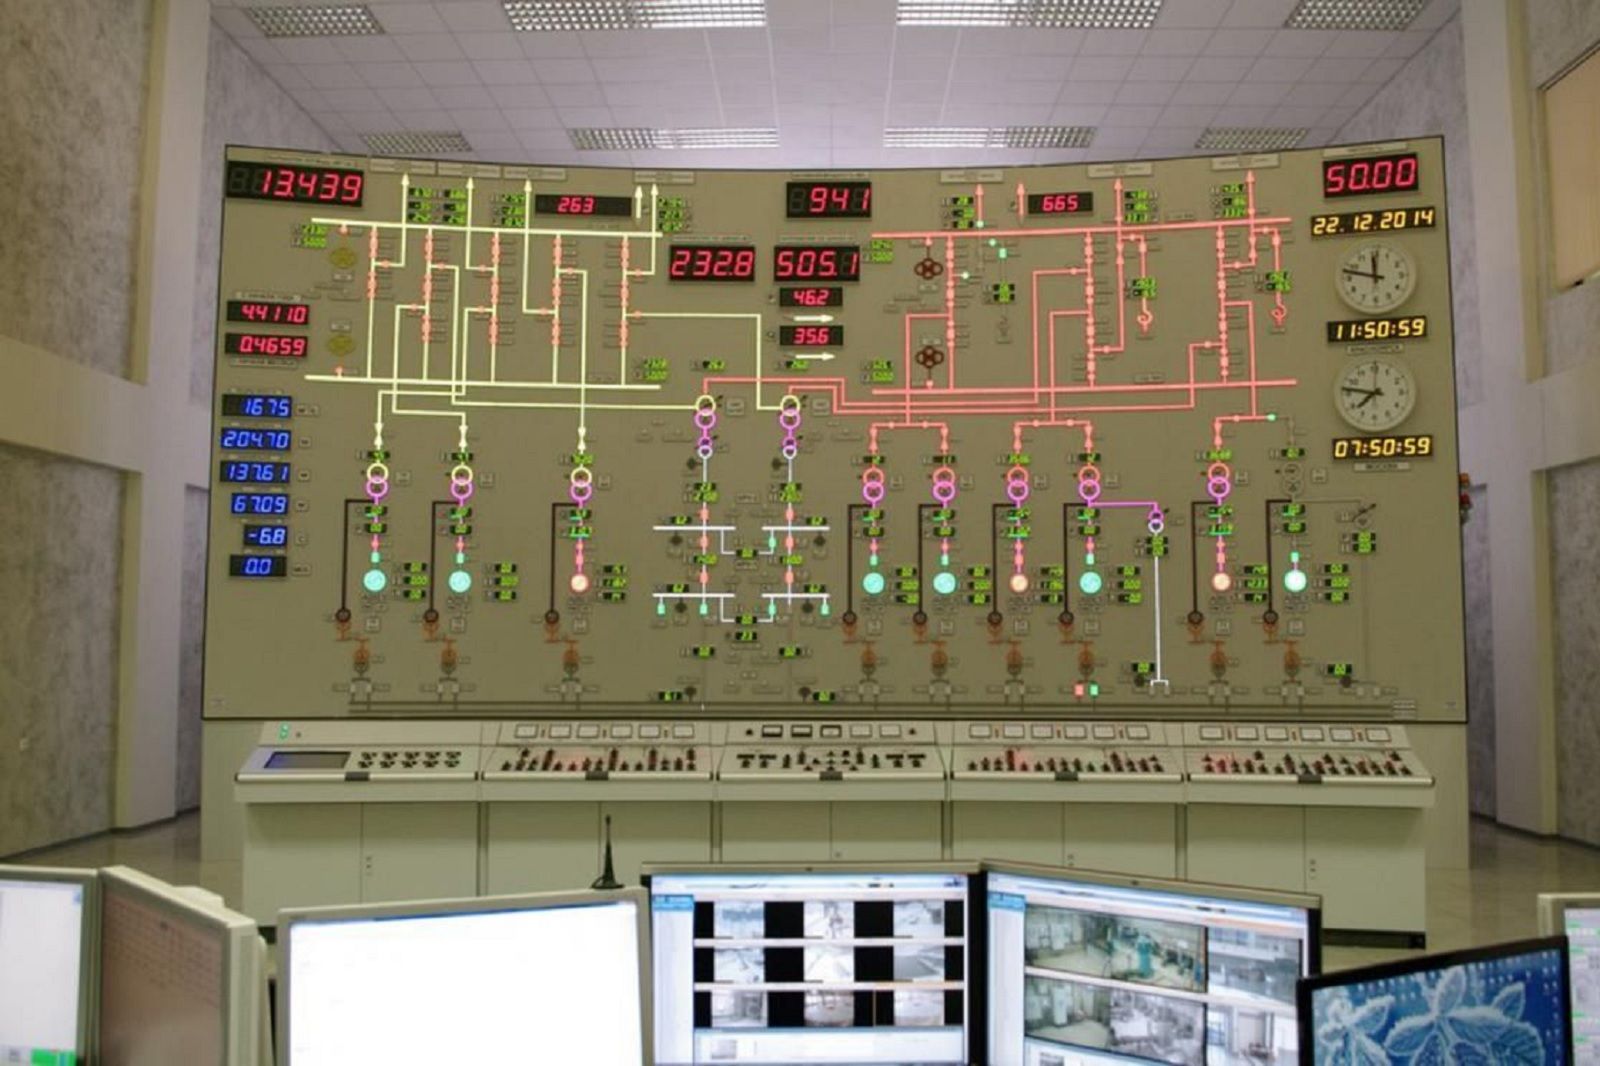 Satisfying photos of classic and modern control rooms